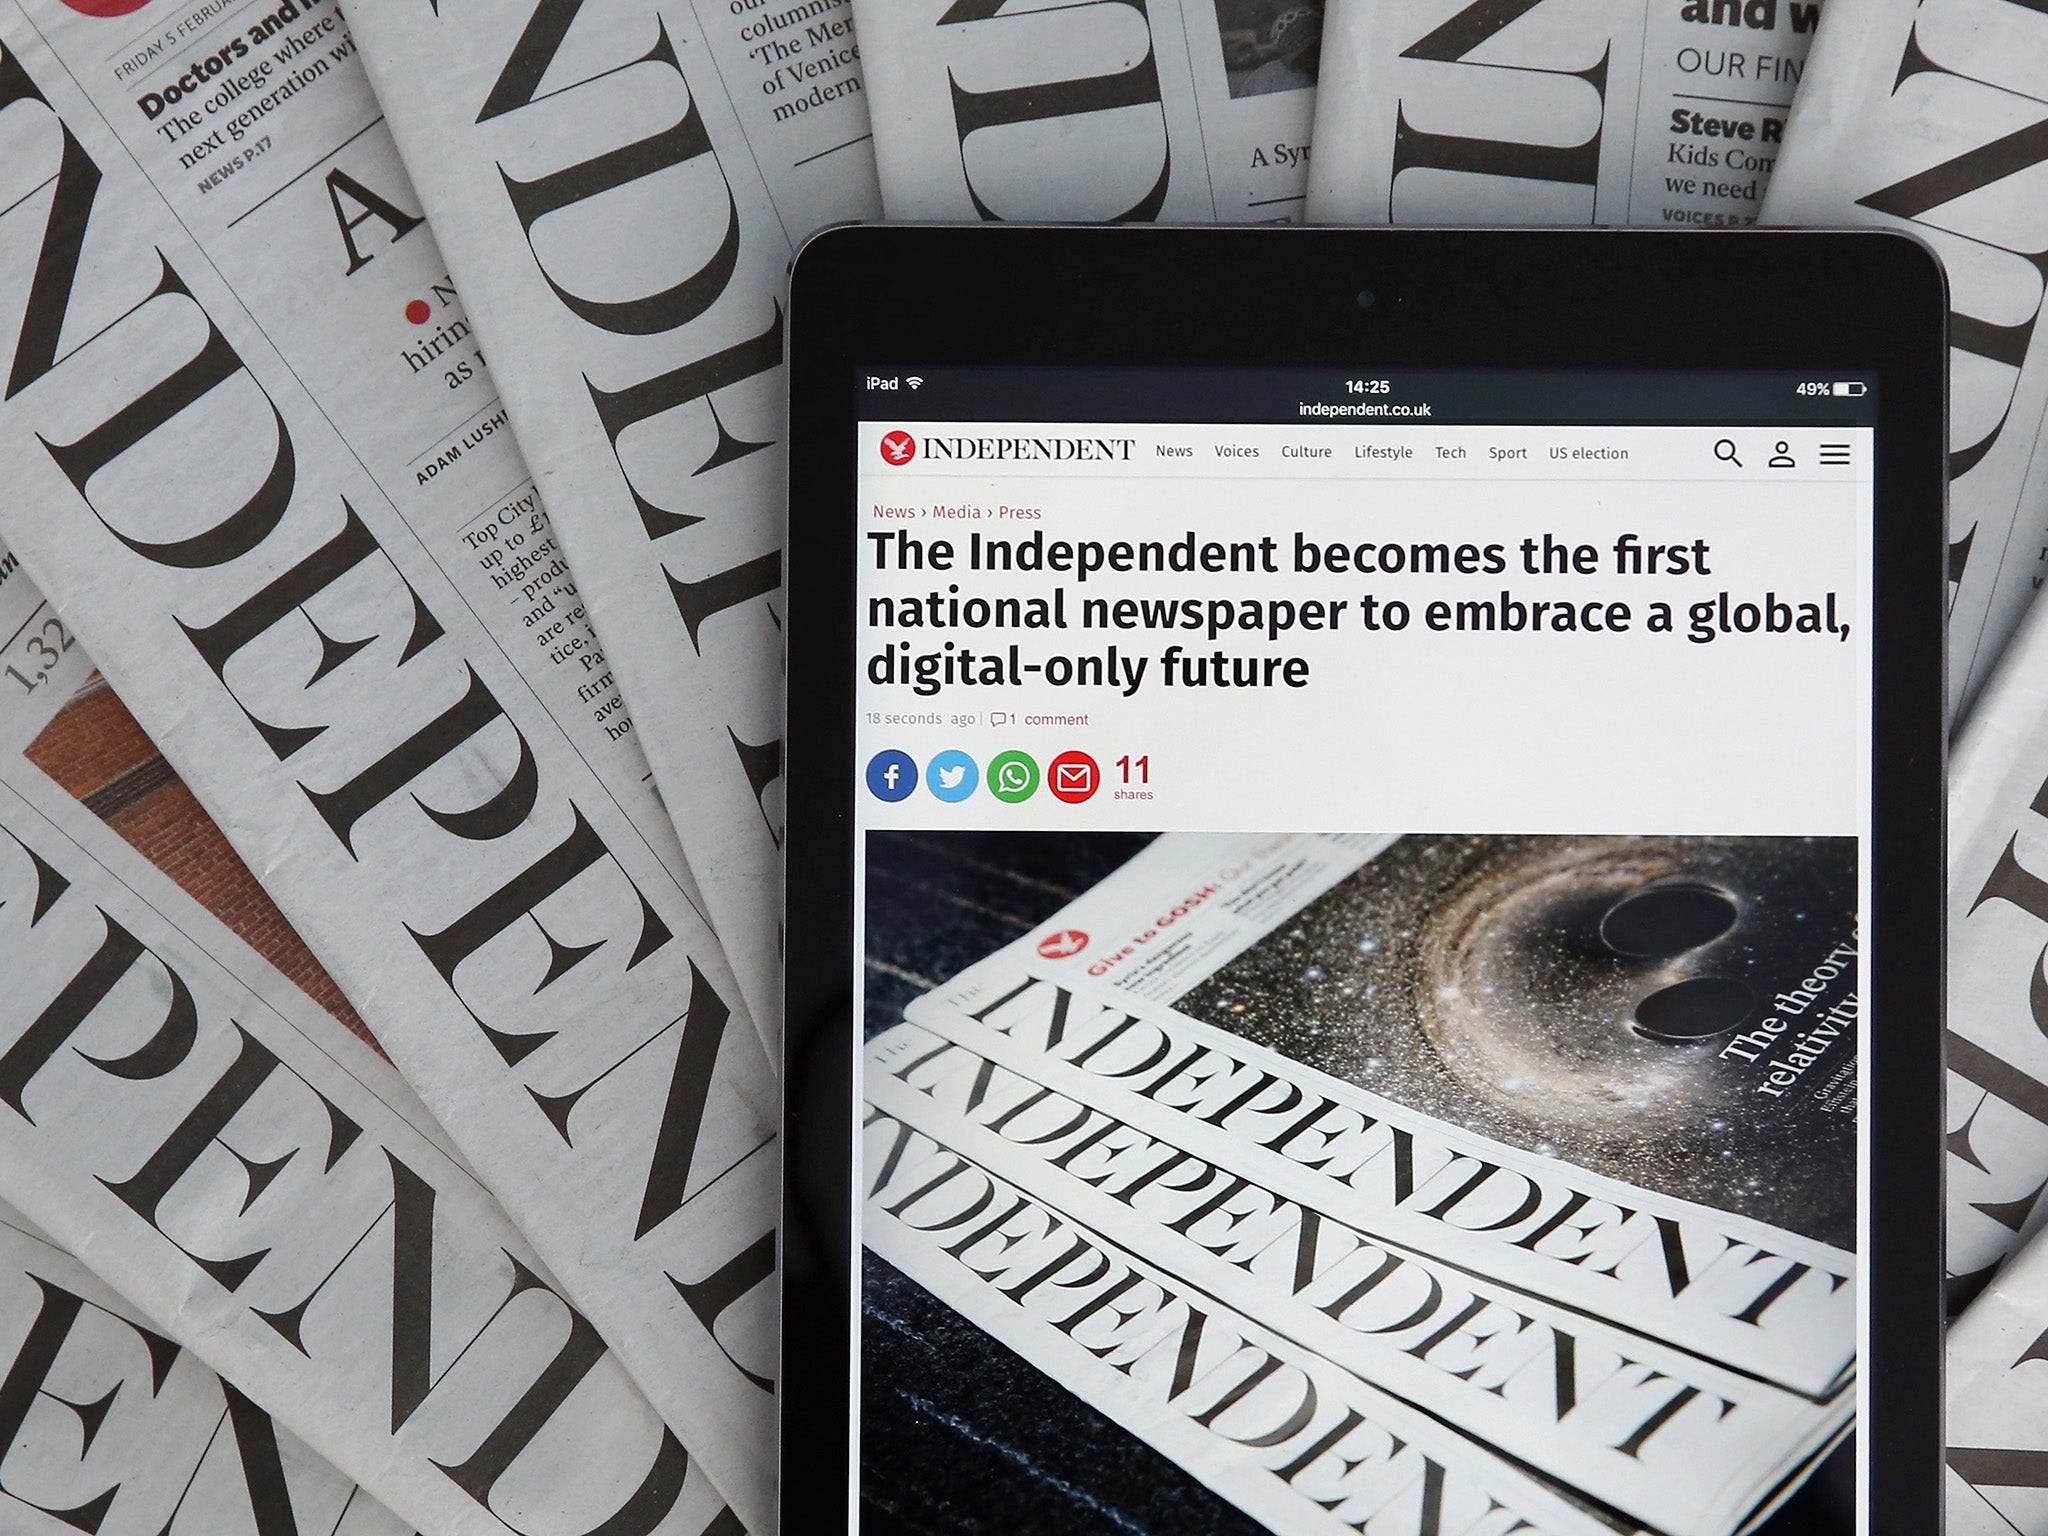 The spirit and quality of The Independent will endure